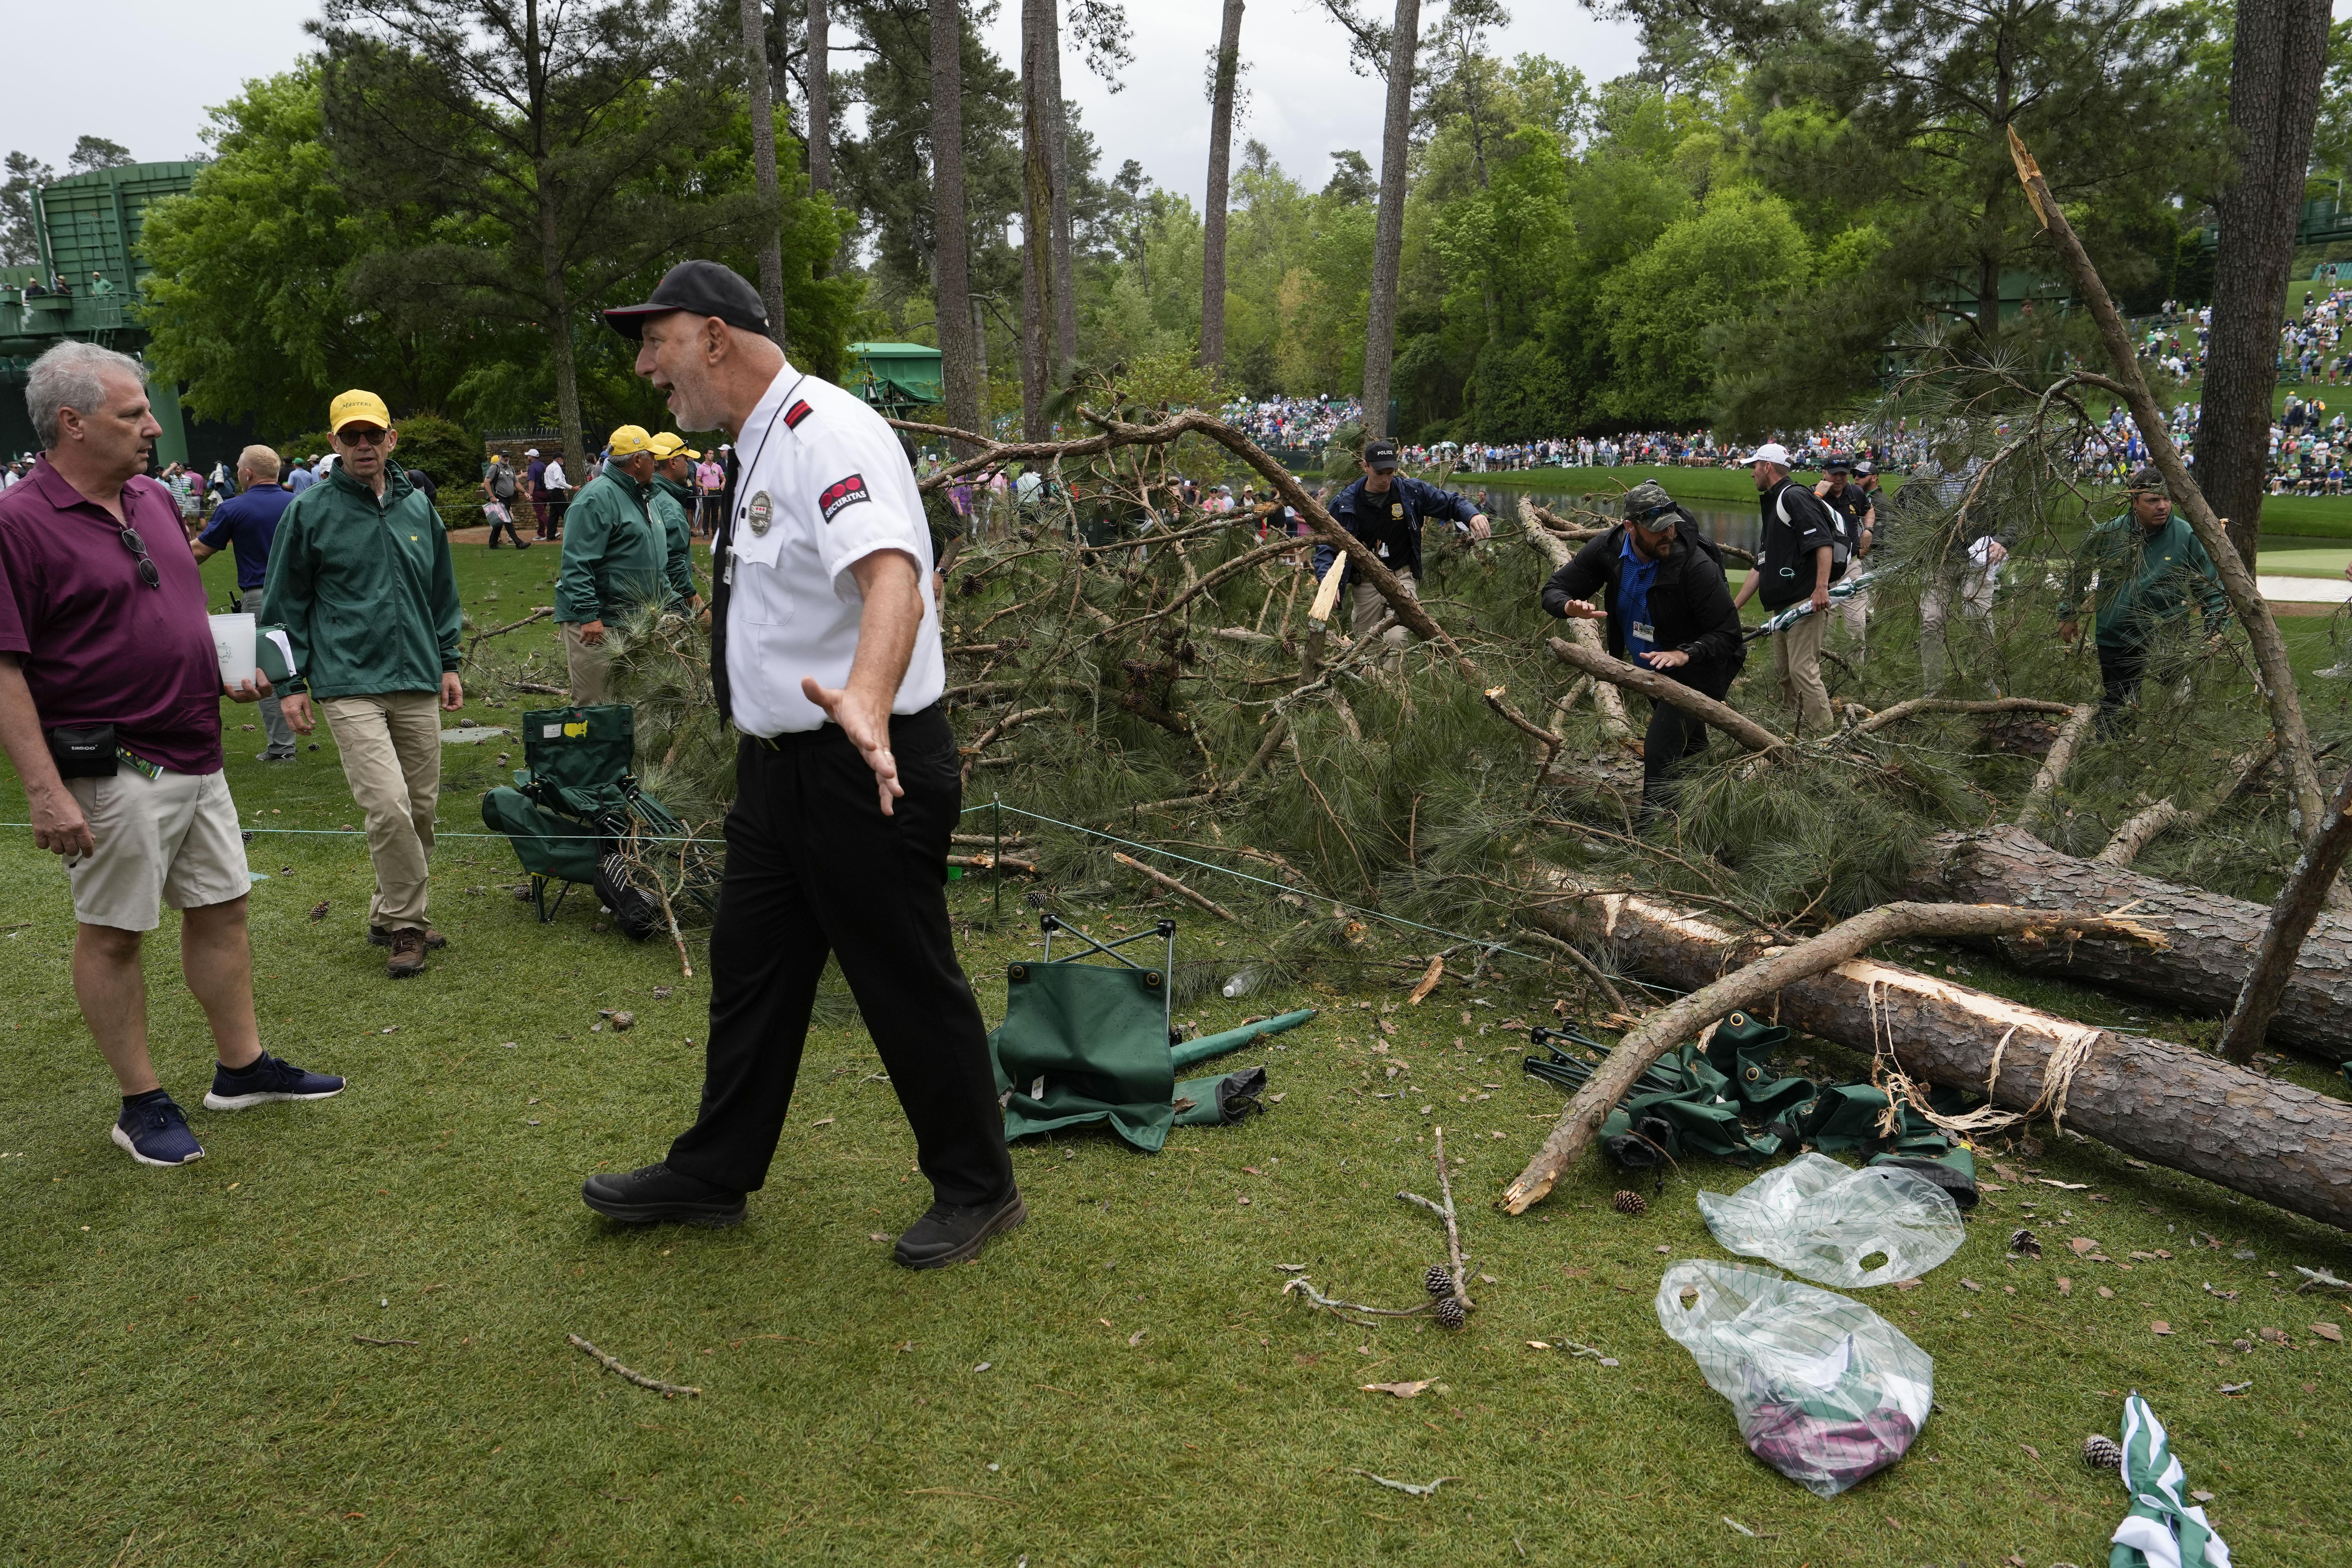 Storms bring down trees at Masters, play halted in 2nd round pic